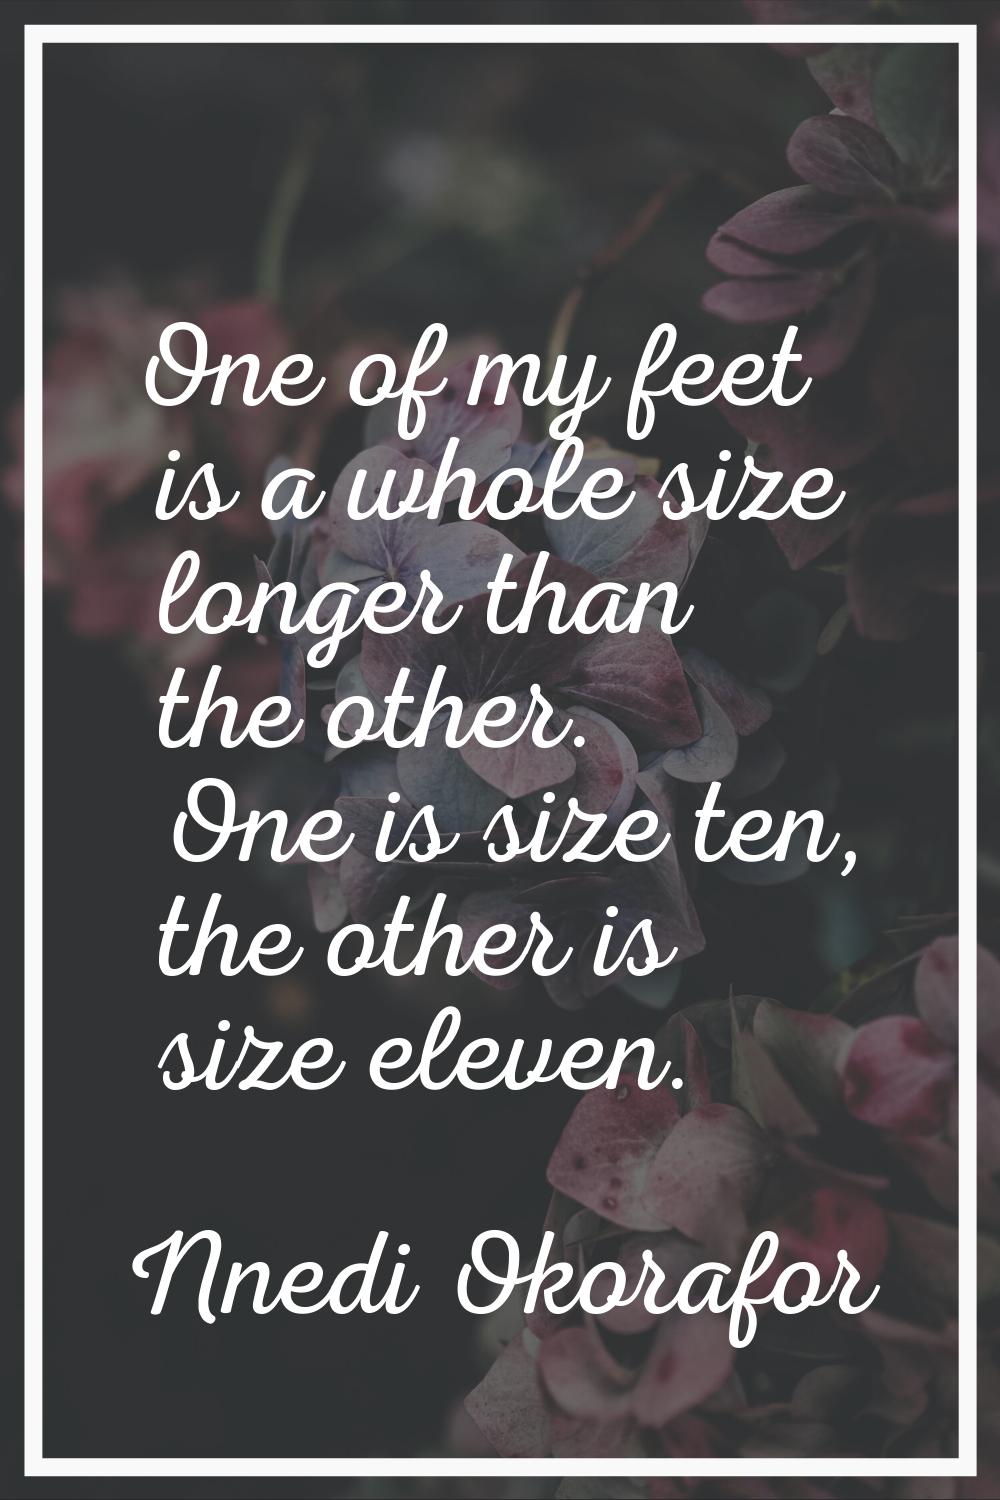 One of my feet is a whole size longer than the other. One is size ten, the other is size eleven.